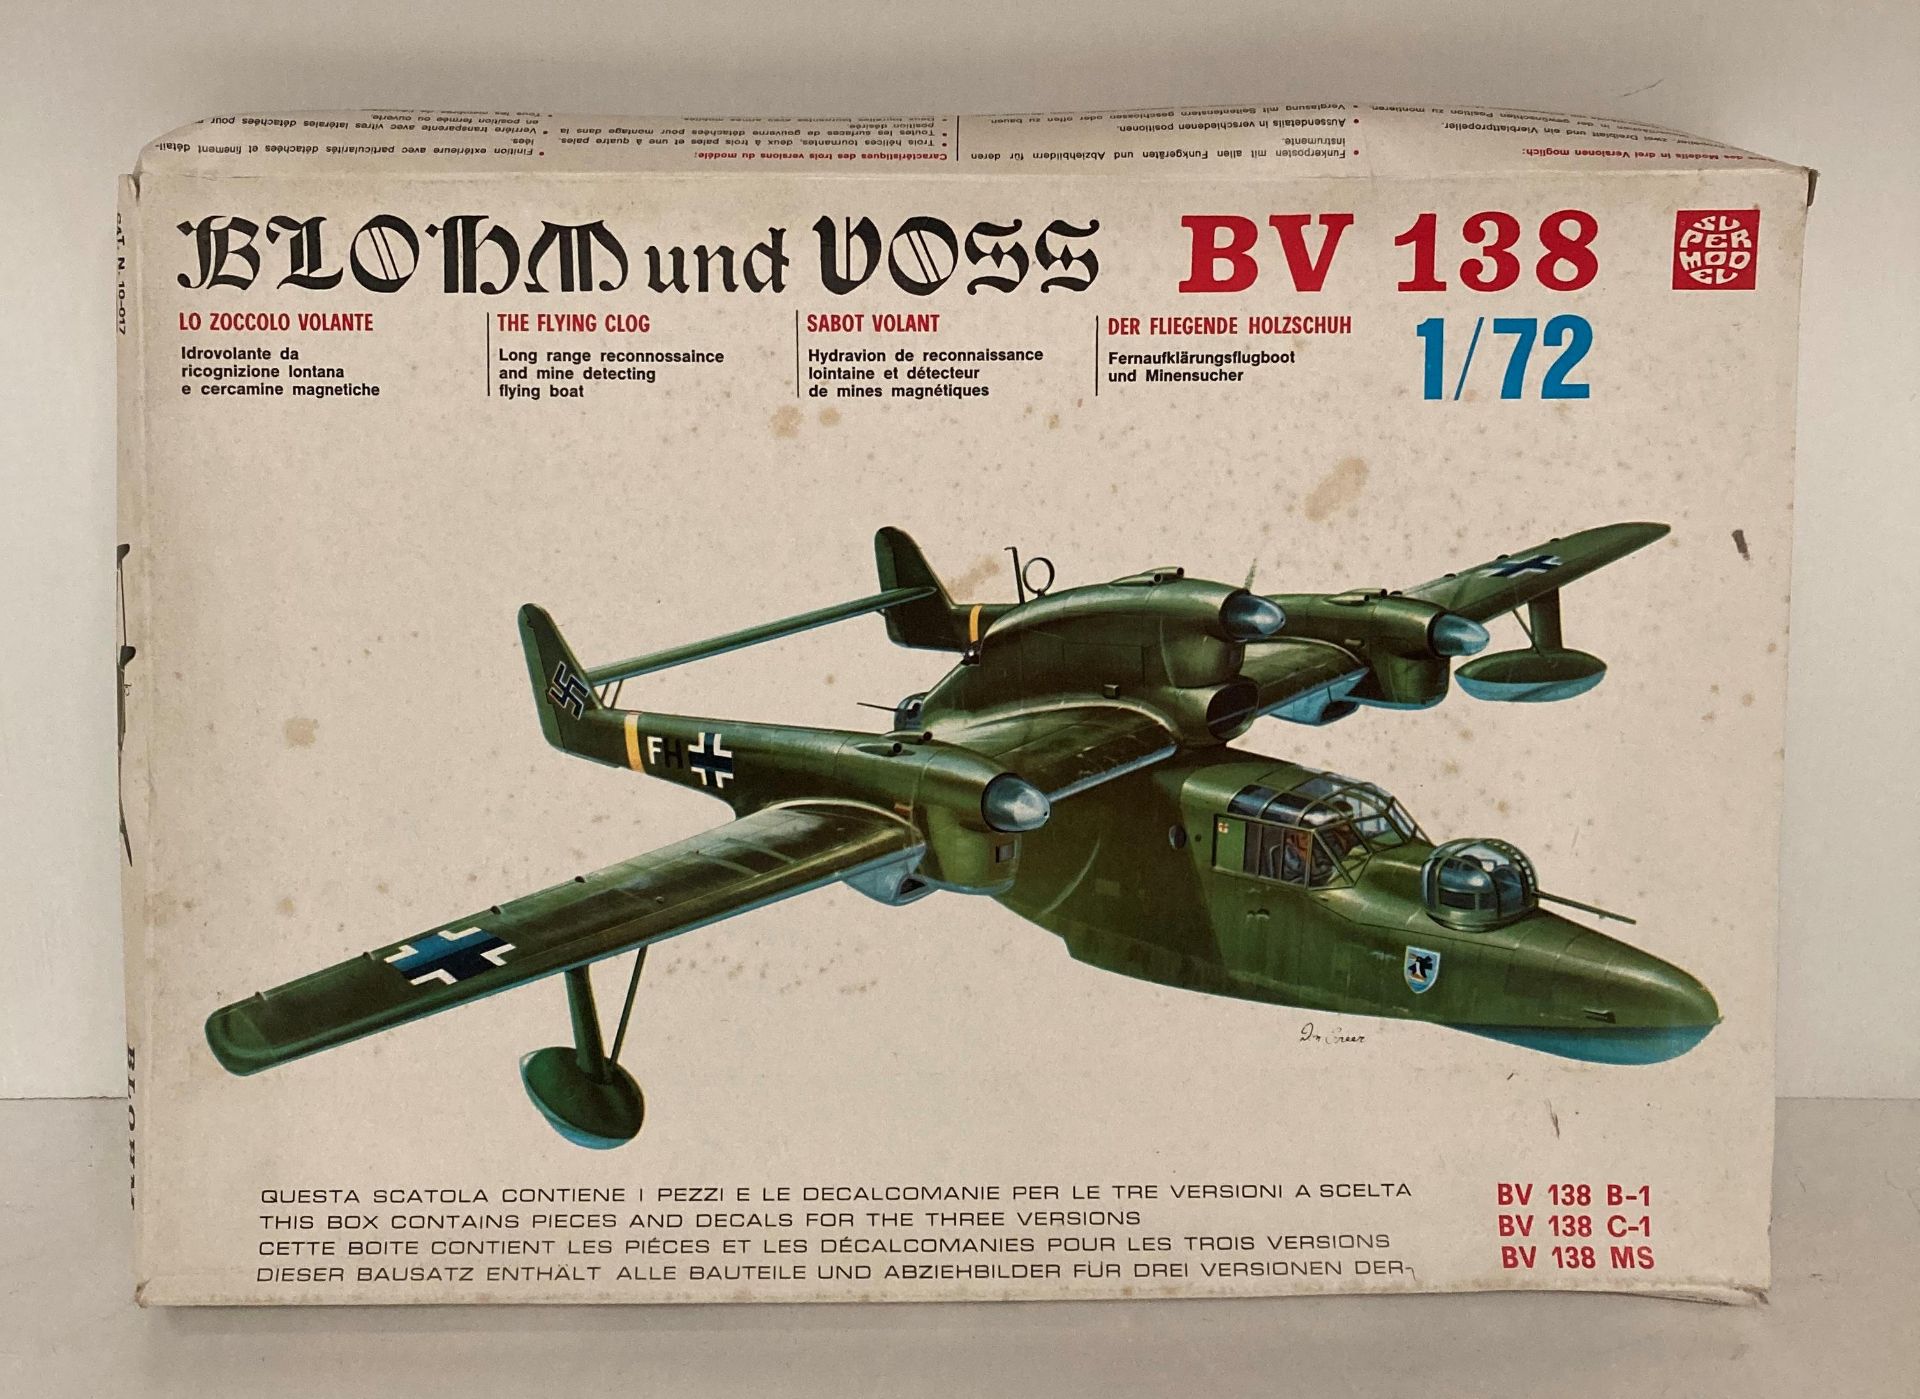 "BLOHM und VOSS BV138" The Flying Dog long range reconnaissance and mine detecting flying boat 1:72